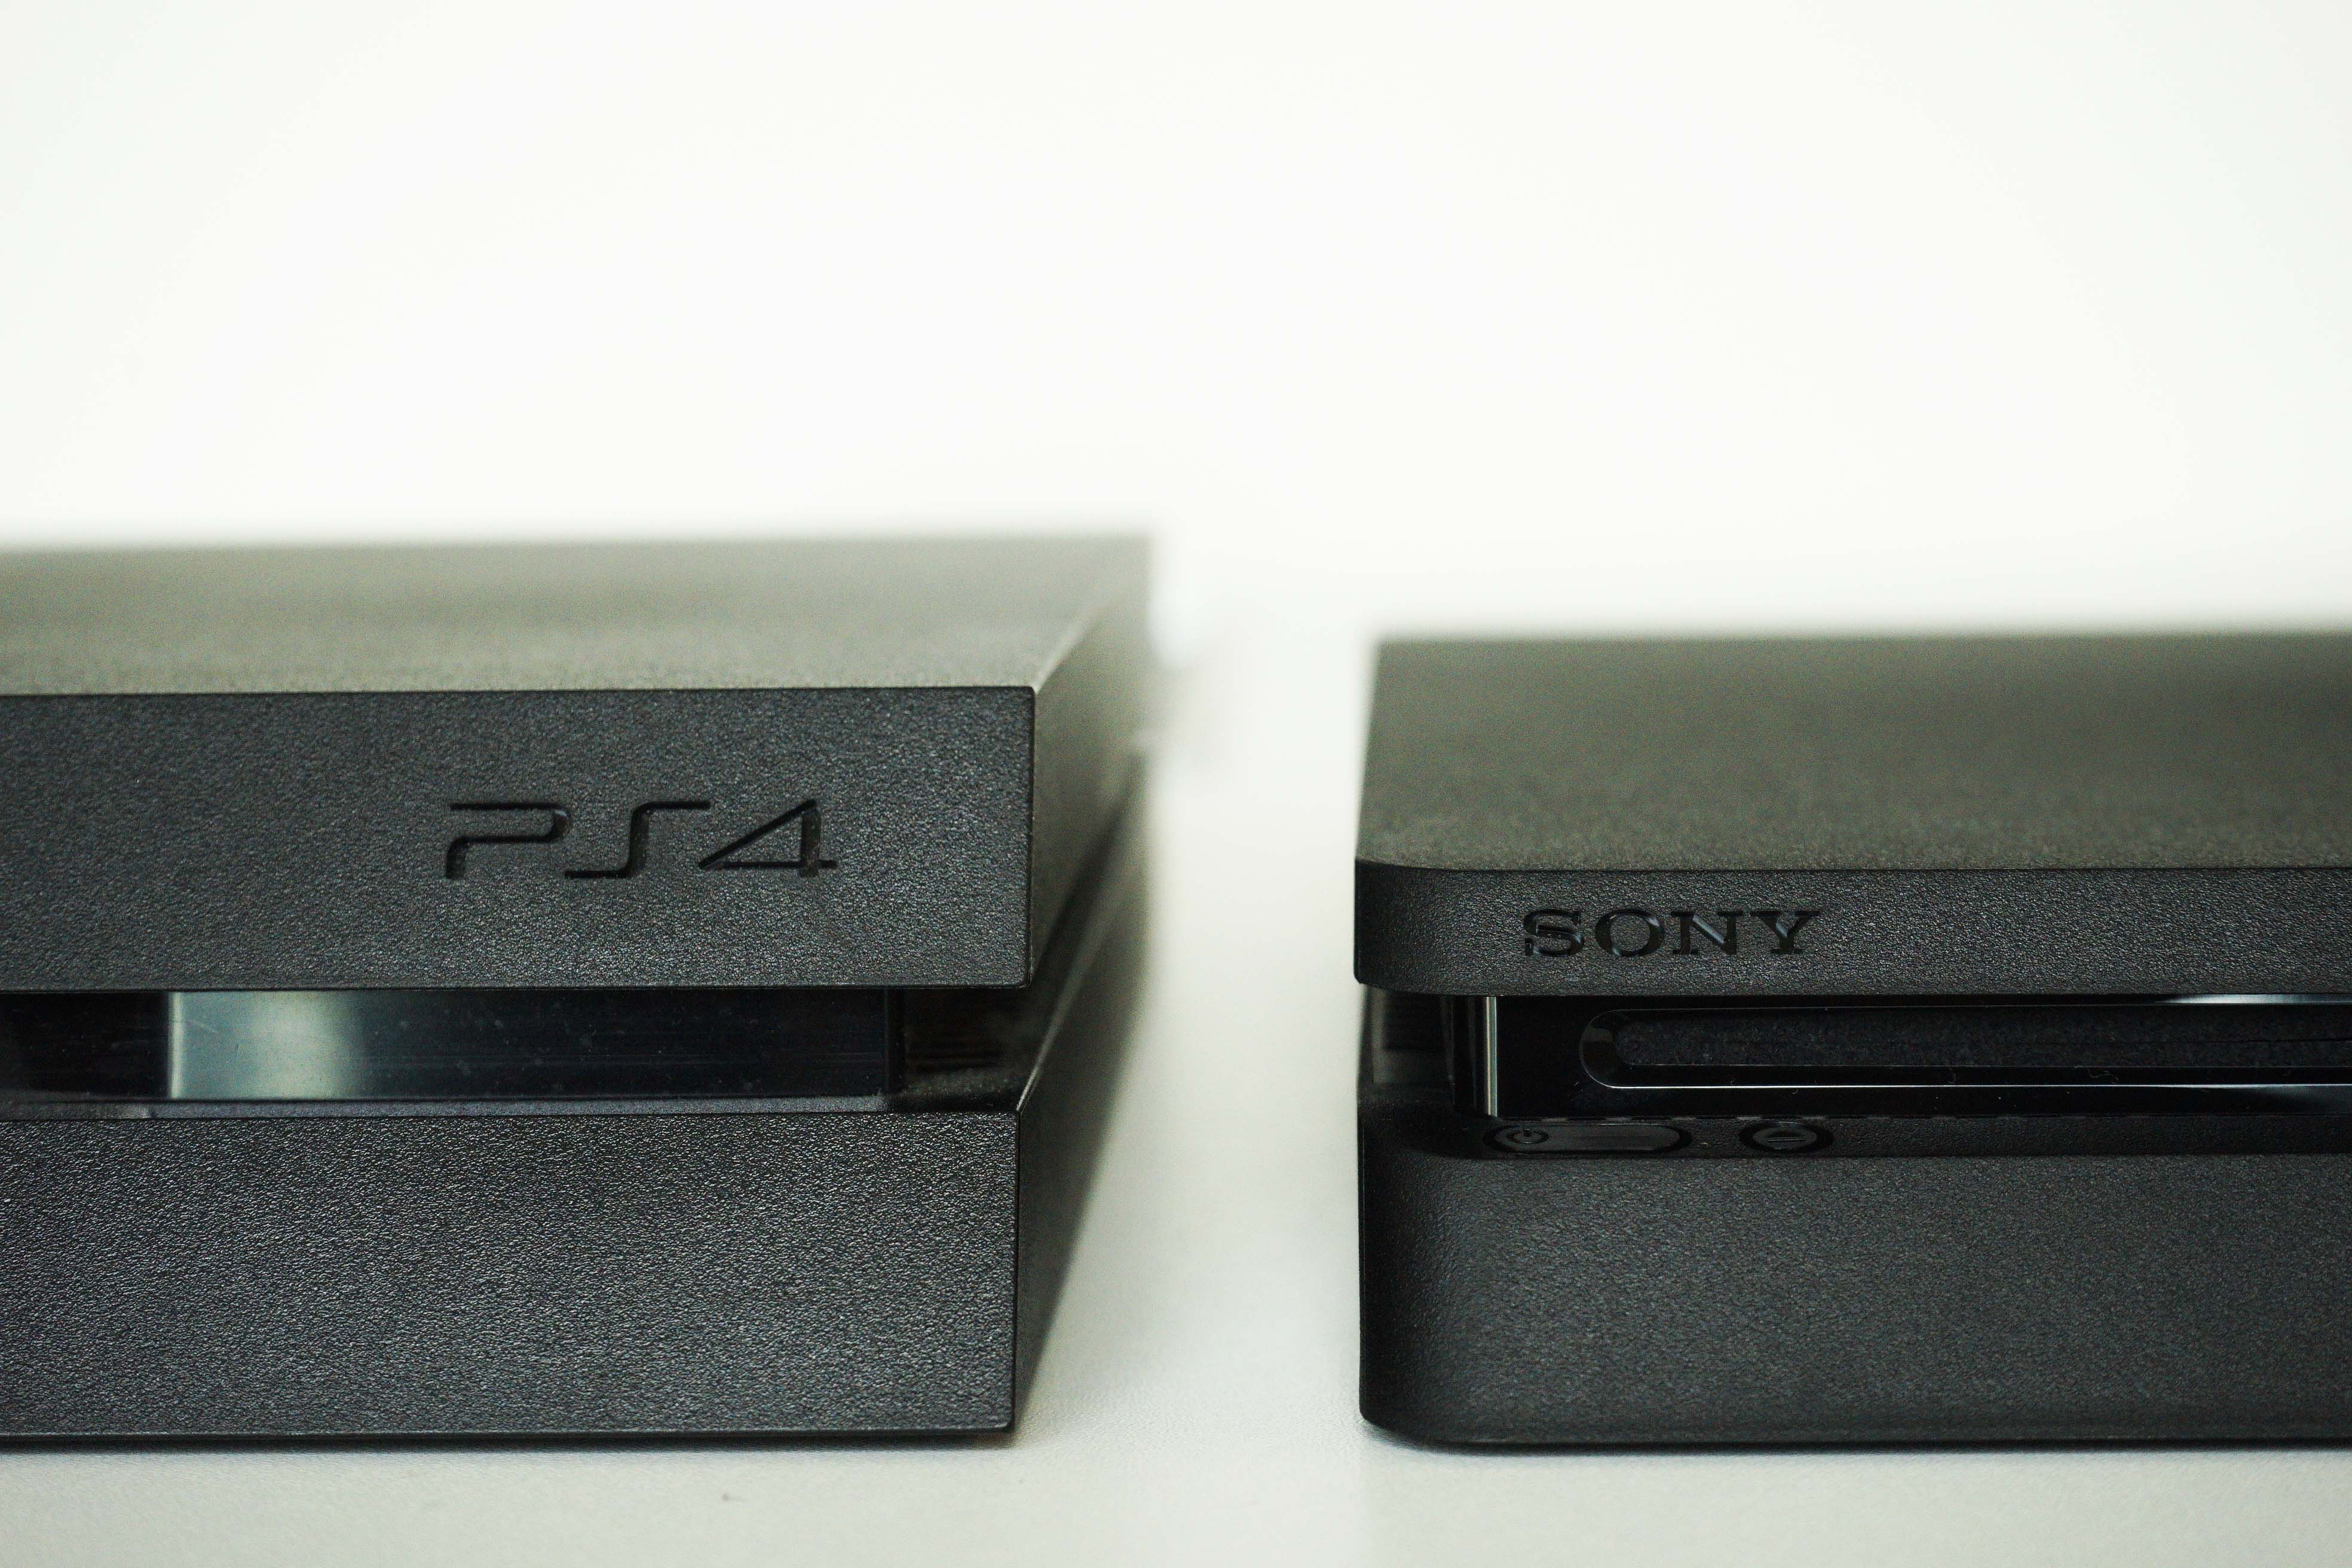 PS4 AND PS4 SLIM. Photo by Gelo Gonzales/Rappler 